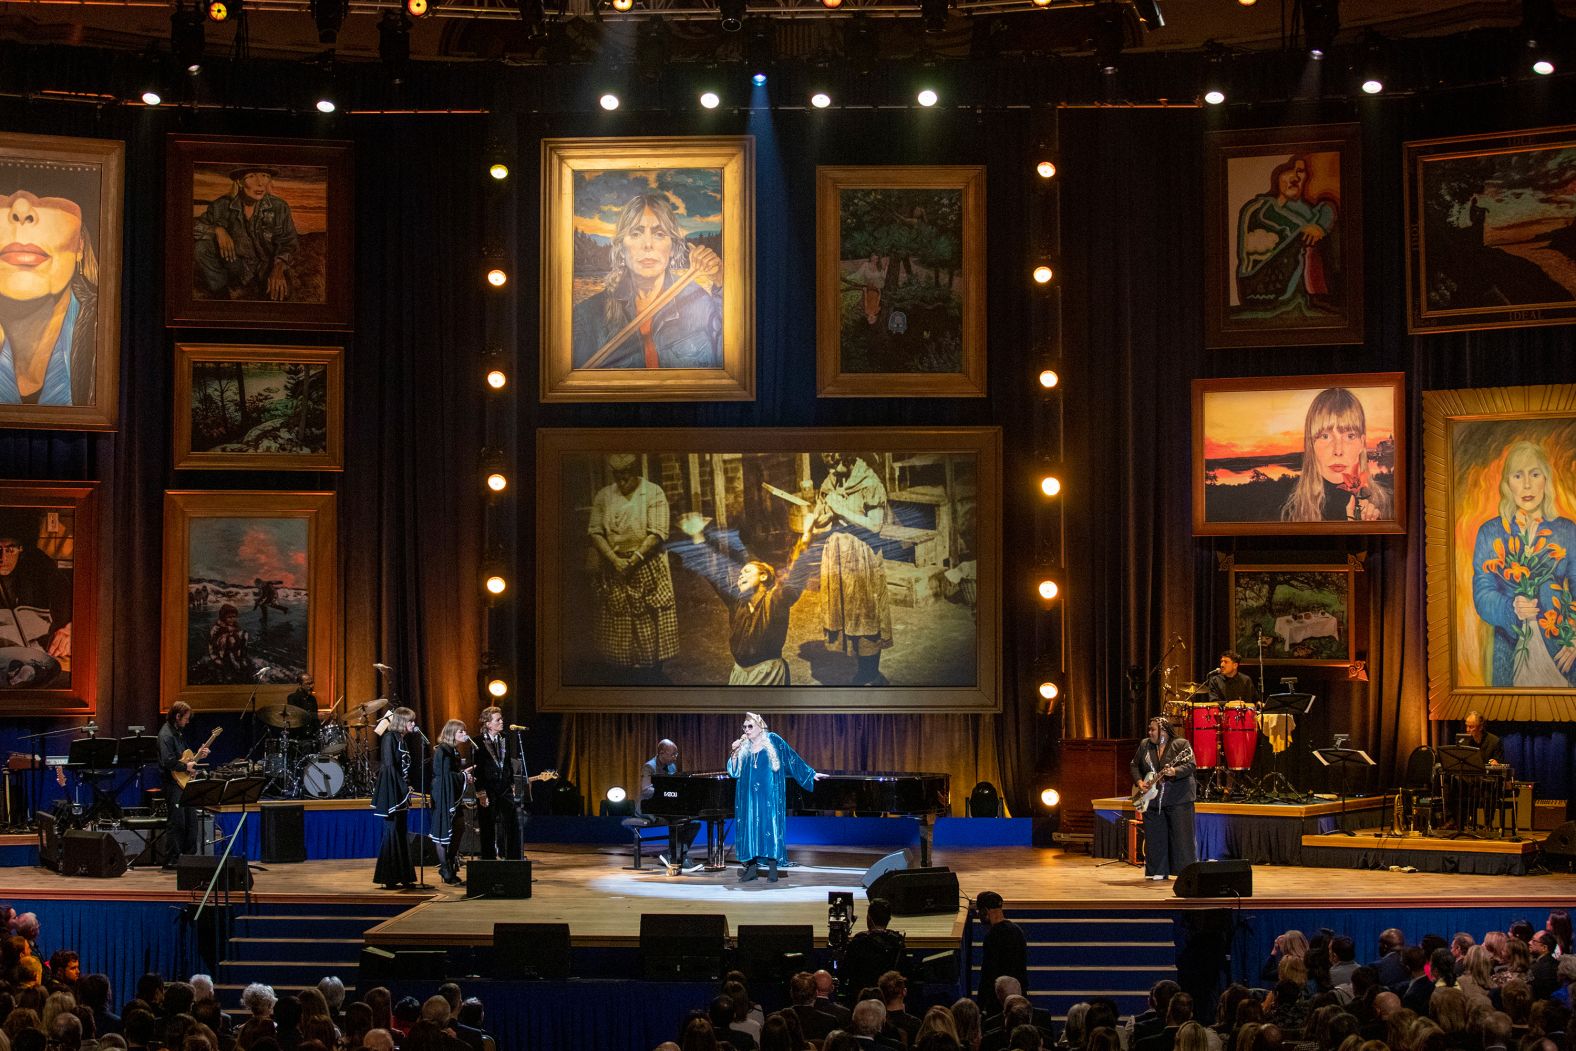 Mitchell performs at the presentation of the Library of Congress Gershwin Prize, which honors a musician's lifetime contribution to popular music. She was the 2023 winner.